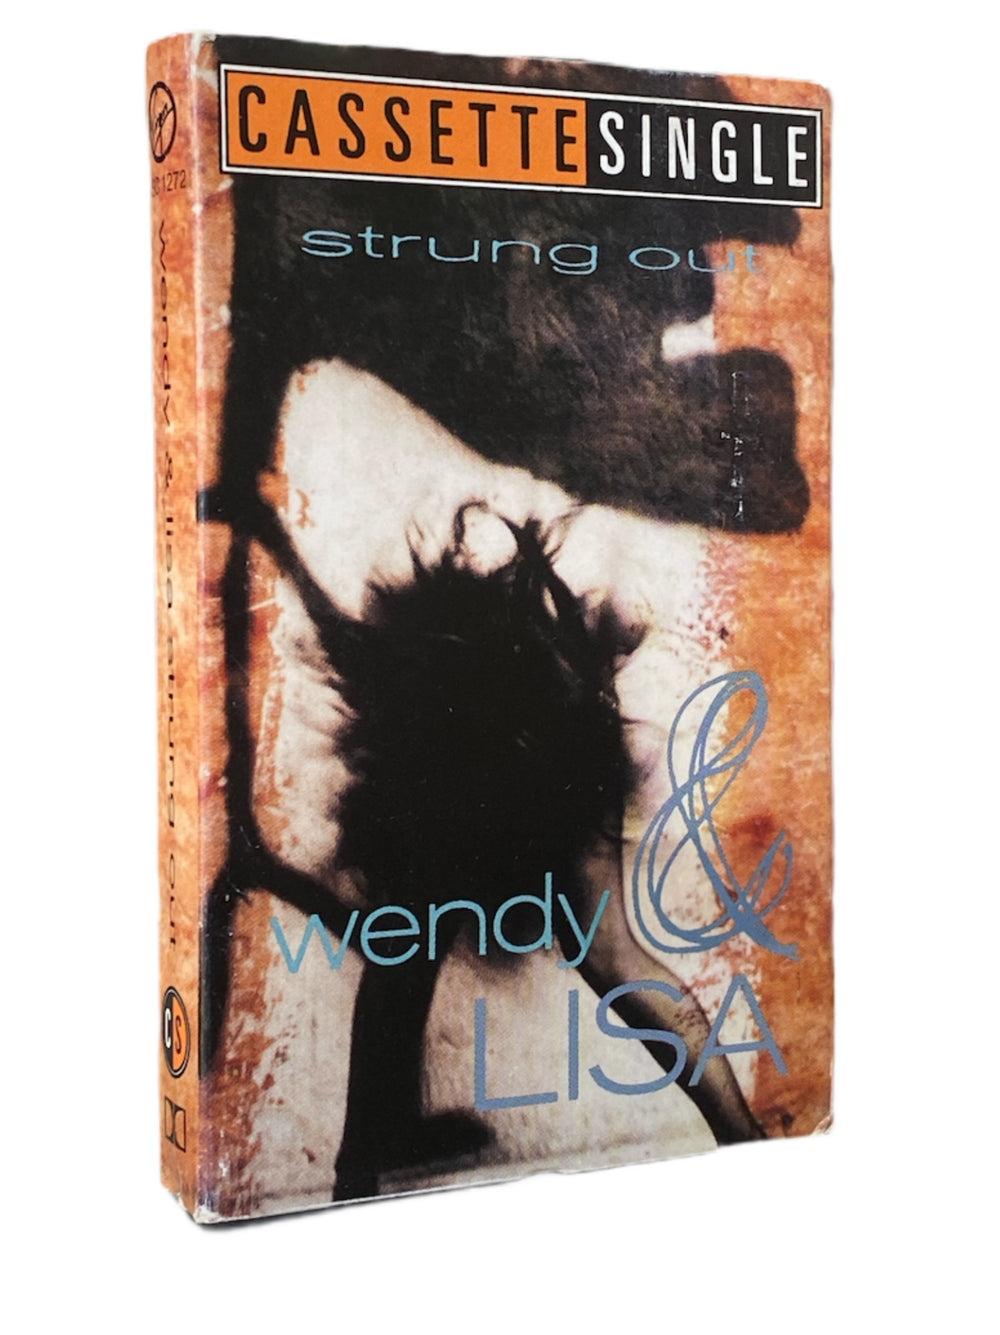 Wendy & Lisa Strung Out Cassette Single UK Release Prince